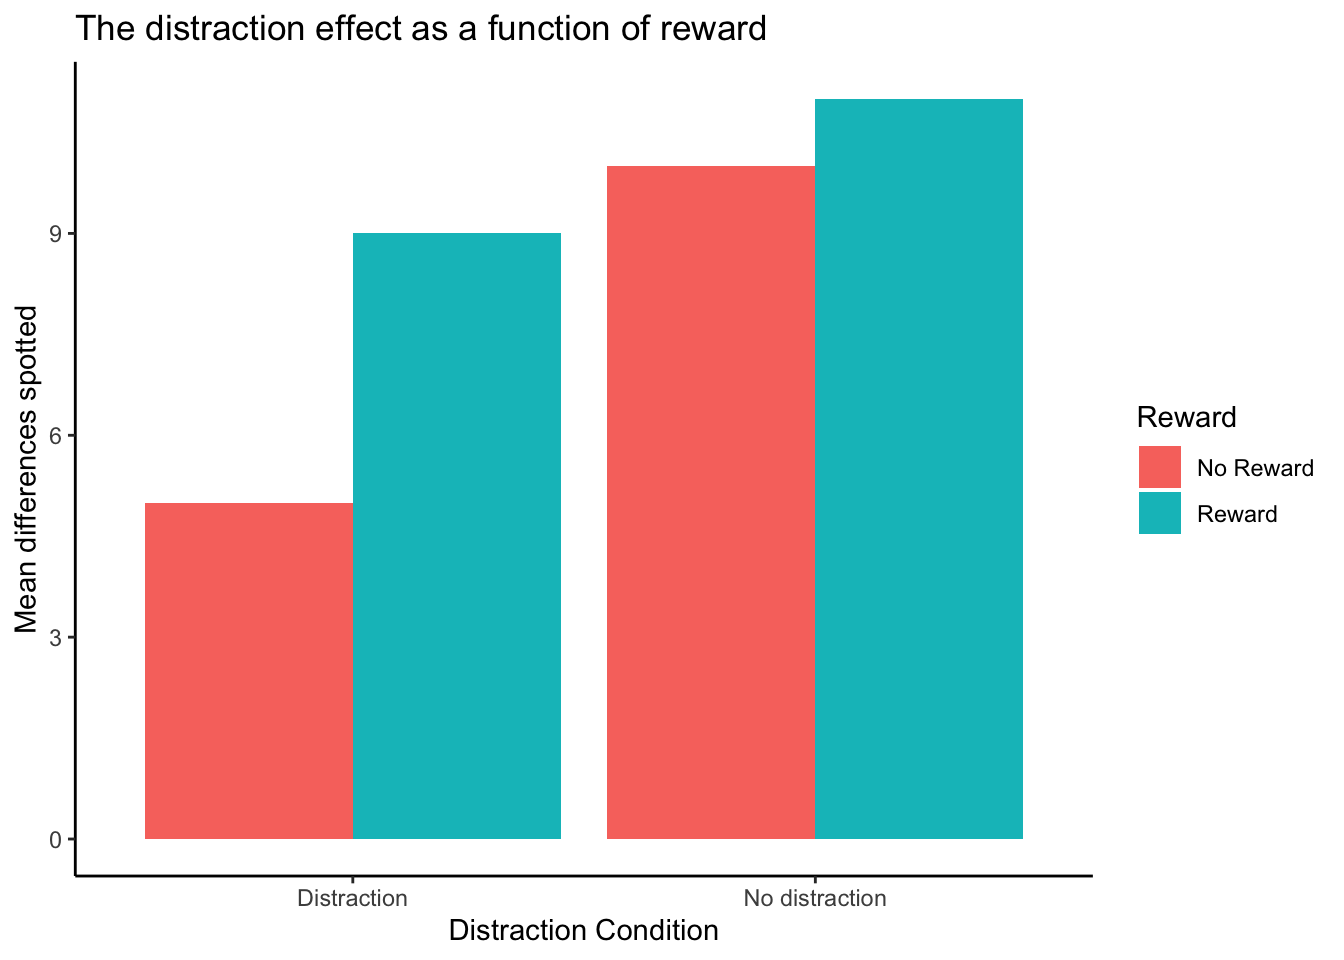 Example data showing how the distraction effect could be modulated by a reward manipulation. Distraction condition plotted on the x-axis, makes it more difficult to compare the changes in the distraction effect between reward conditions